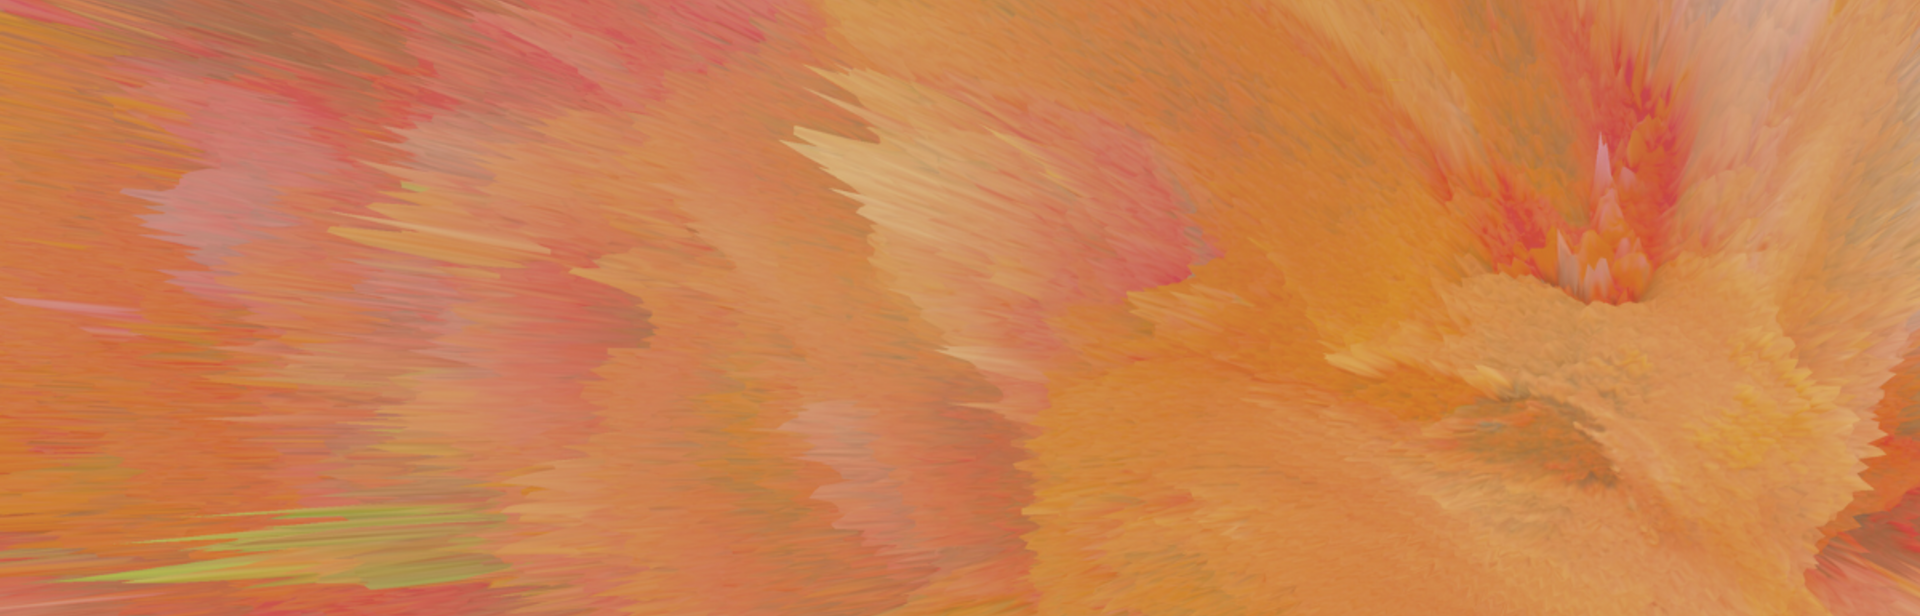 abstract orange and pink brushstrokes